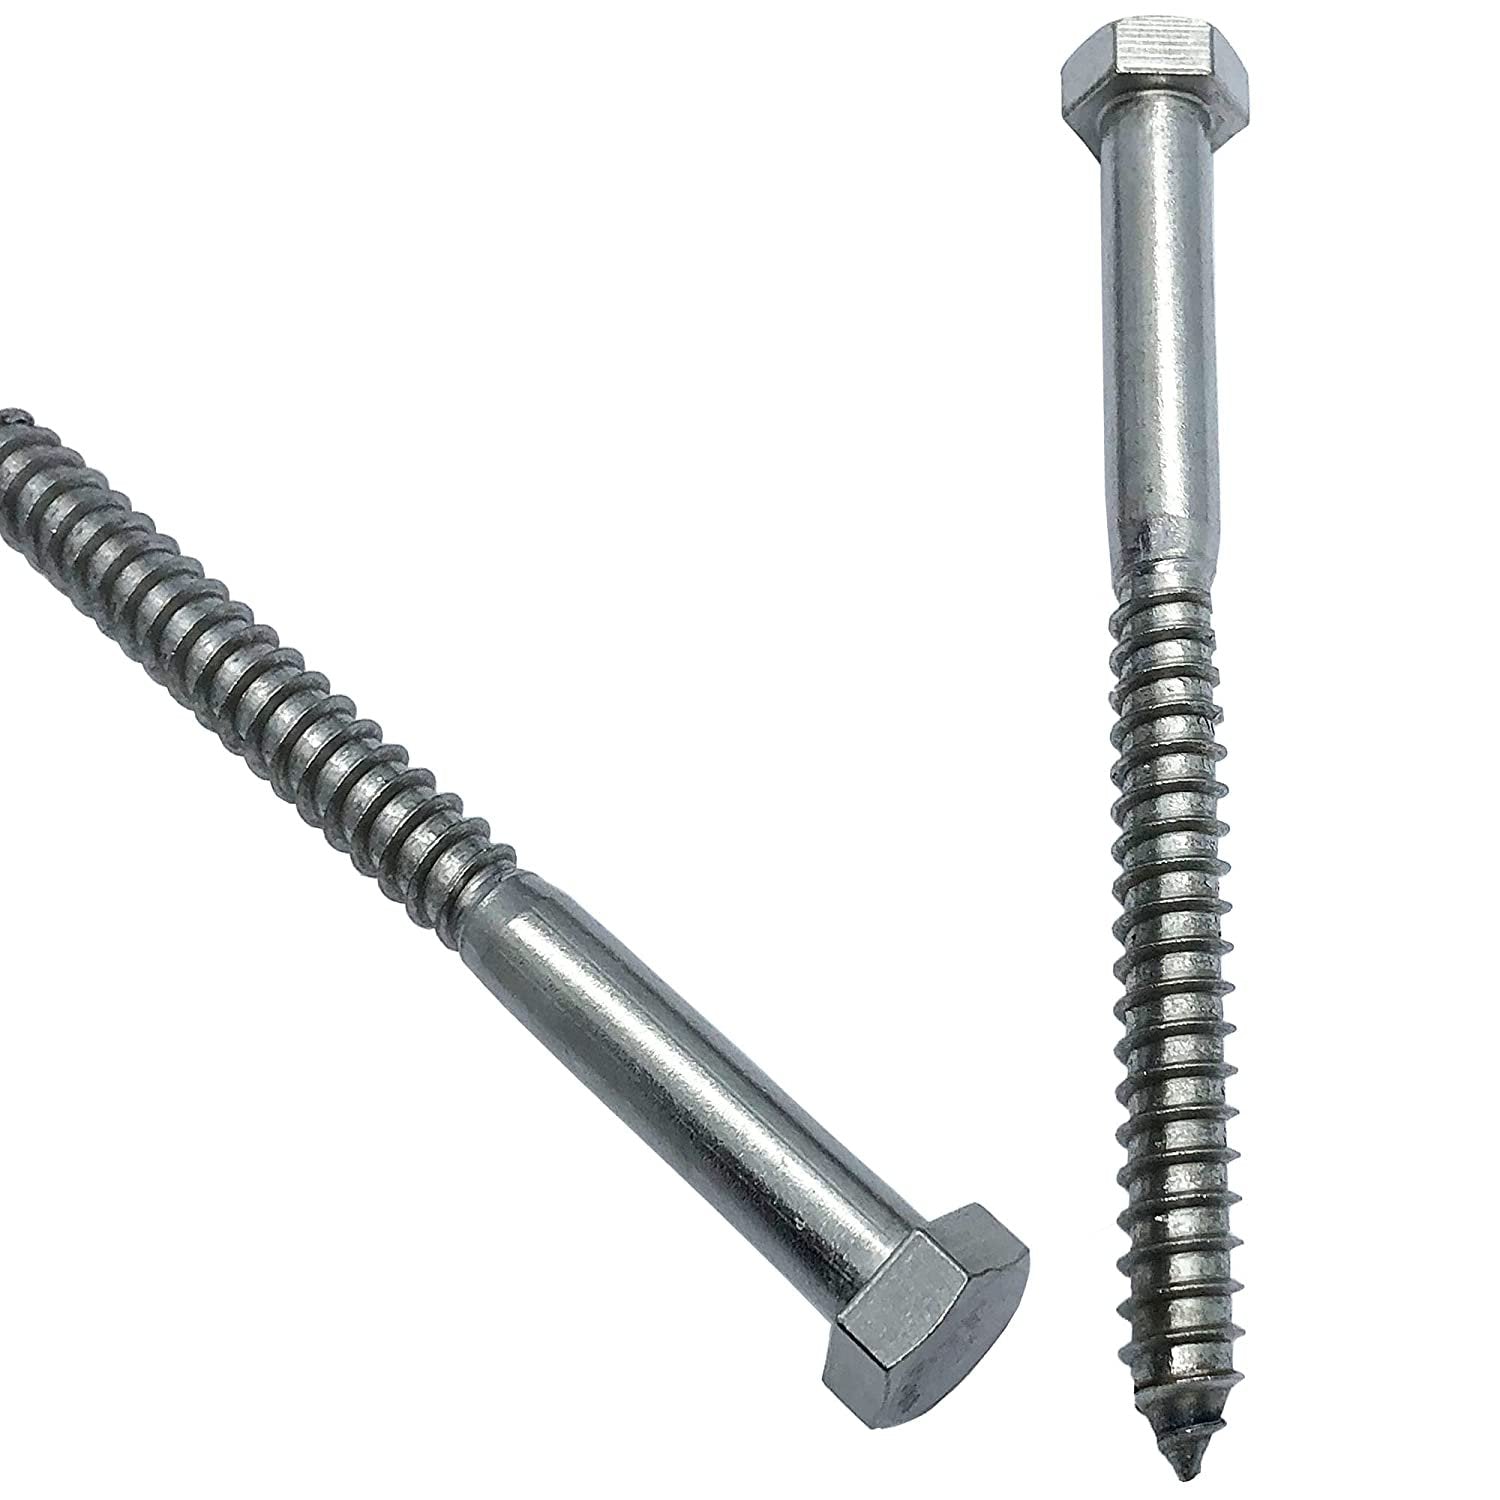 3/8 x 6 - 304 Grade Stainless Steel Lag Screws, Hex Head Fasteners, Stainless Steel Screw. Use As Construction, Wood, Metal, Lag Screw or Mounting